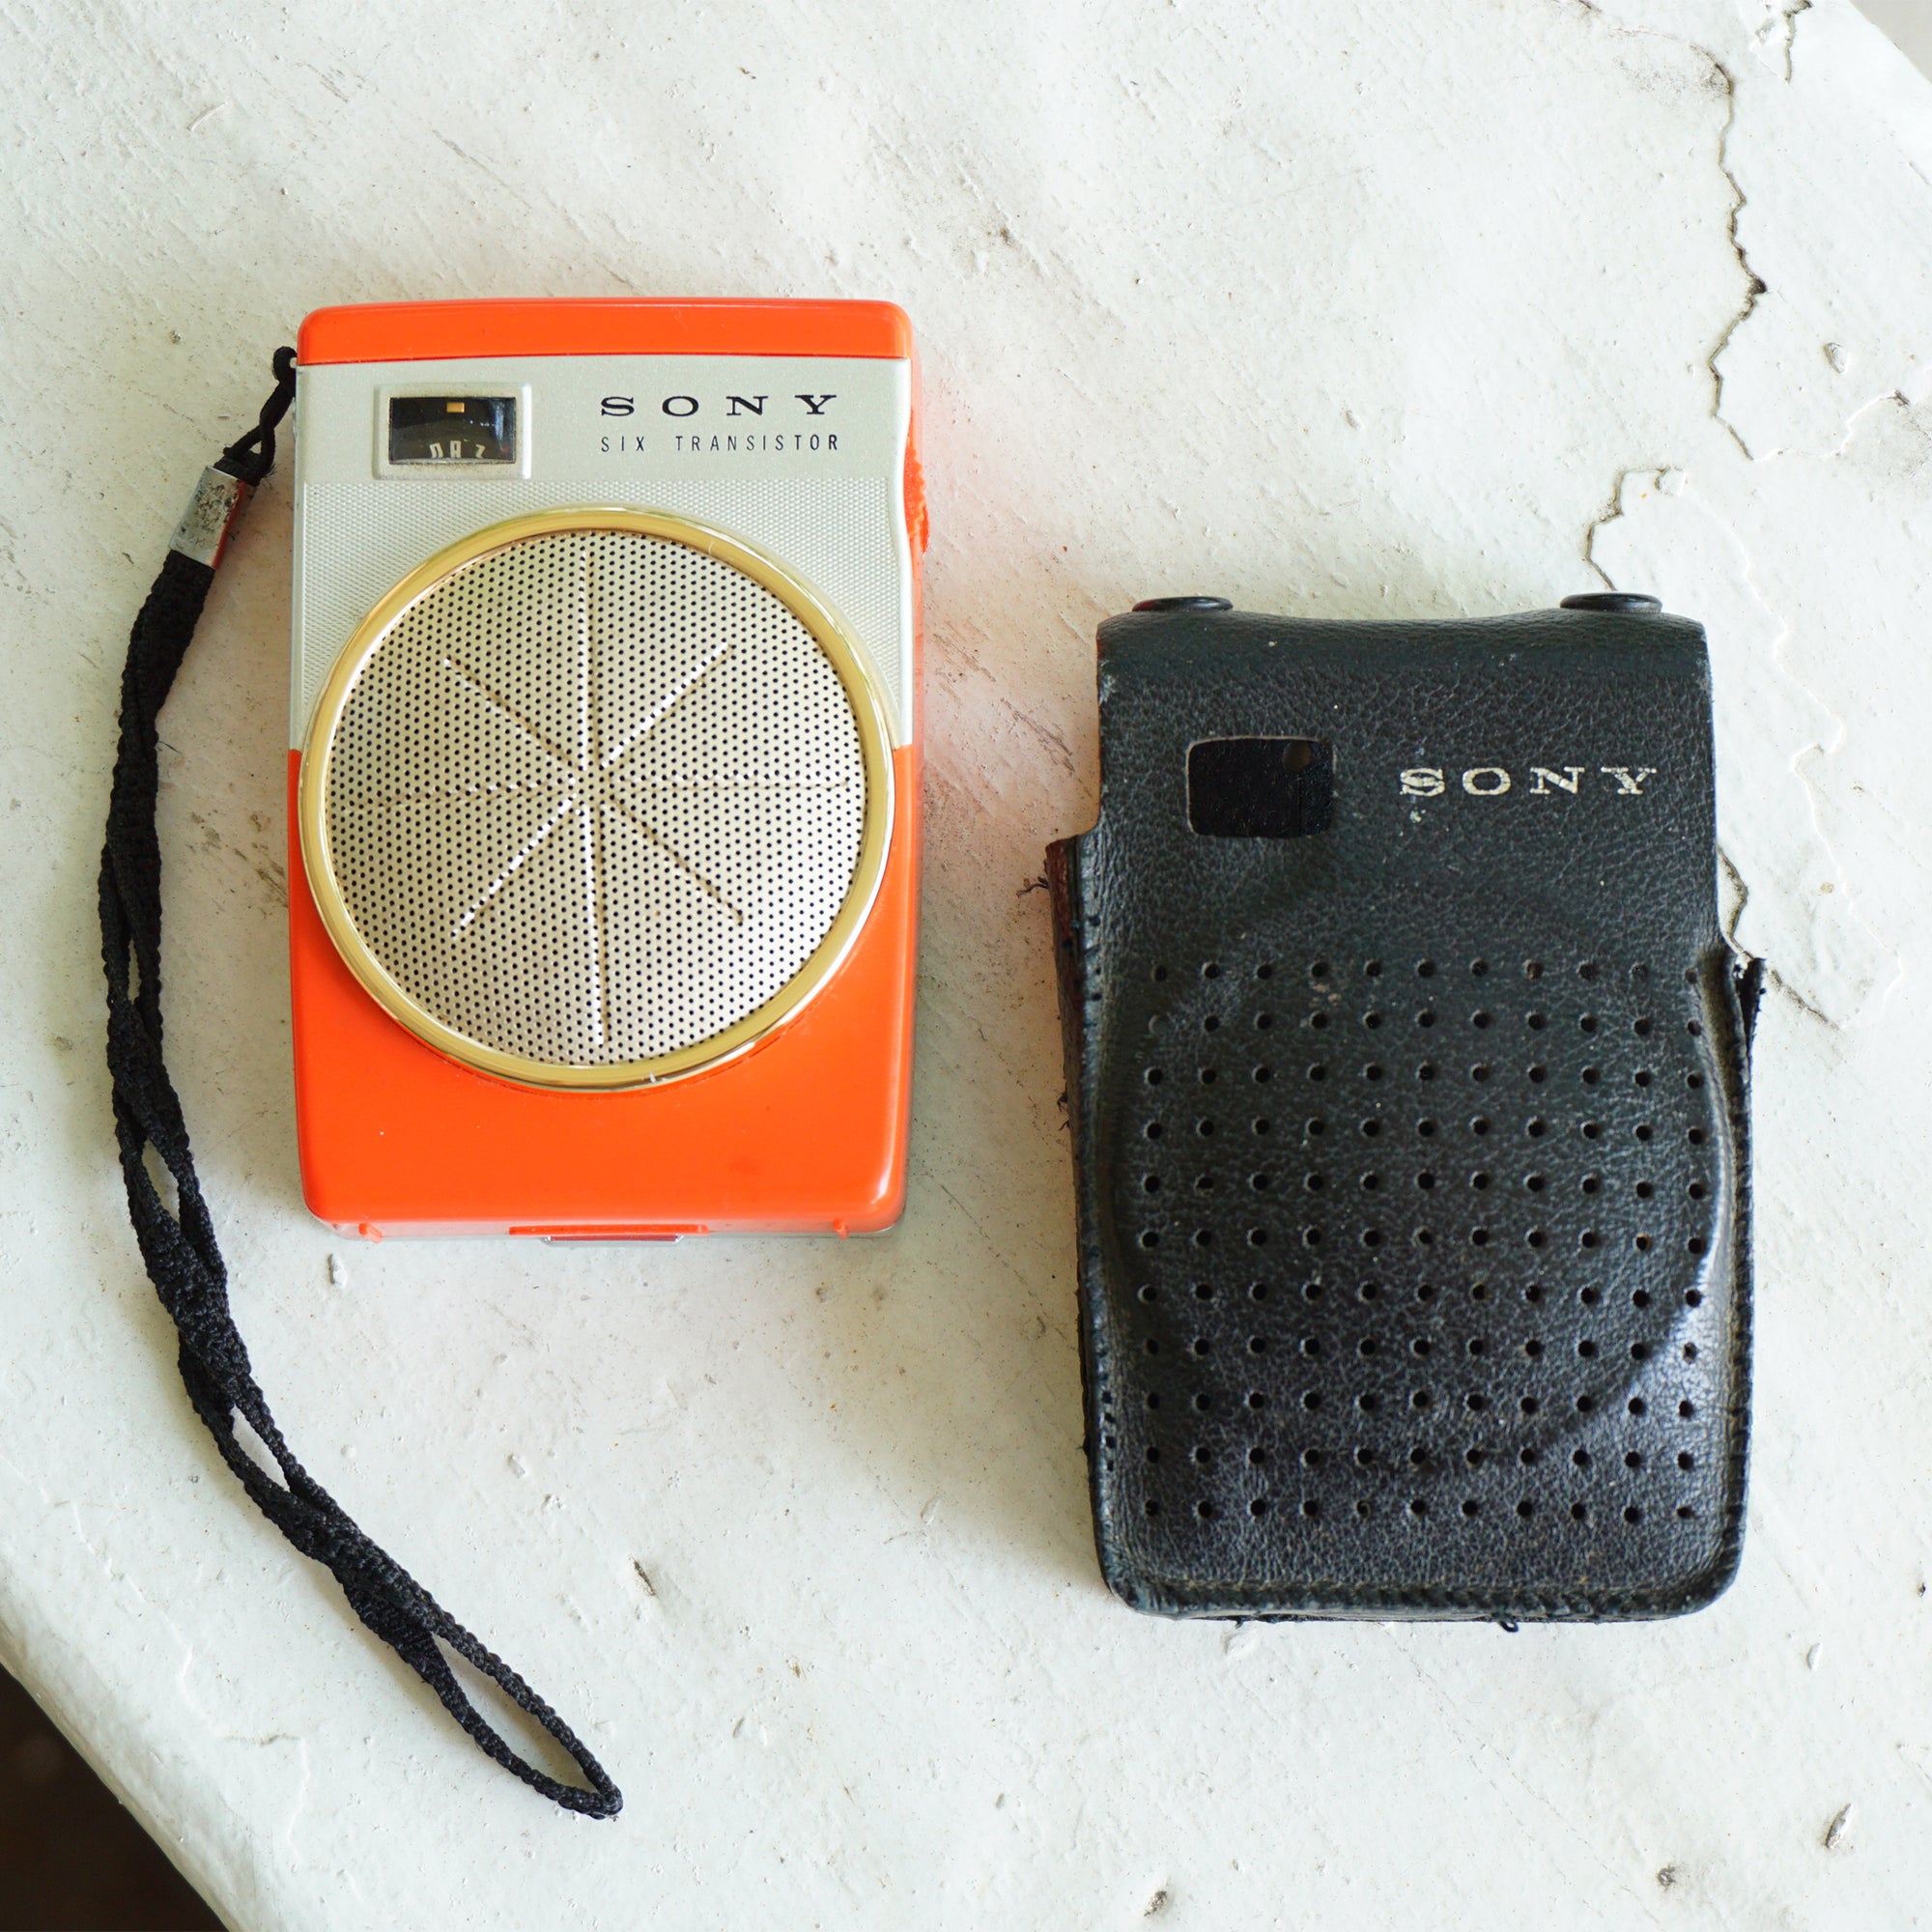 1960s Rare Vintage SONY Six Transistor Orange Pocket Radio with Leather Case. Model: TR-620. Made in Japan.